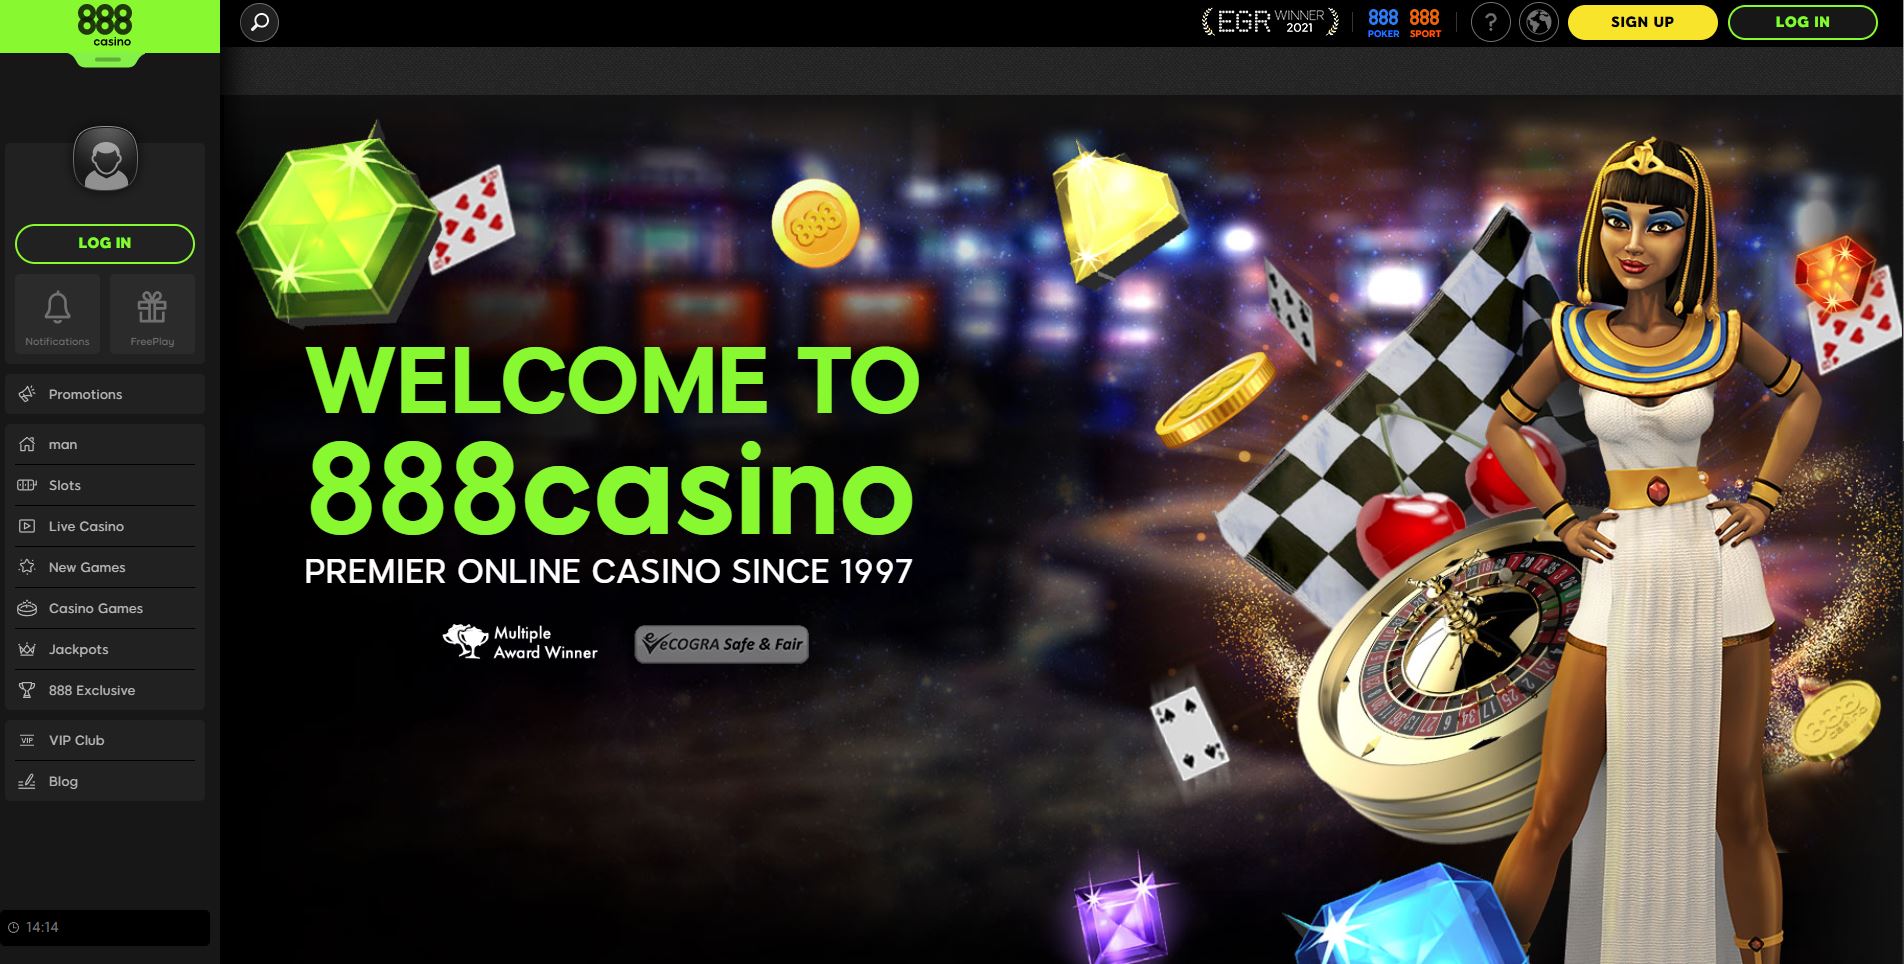 888casino Welcome Page